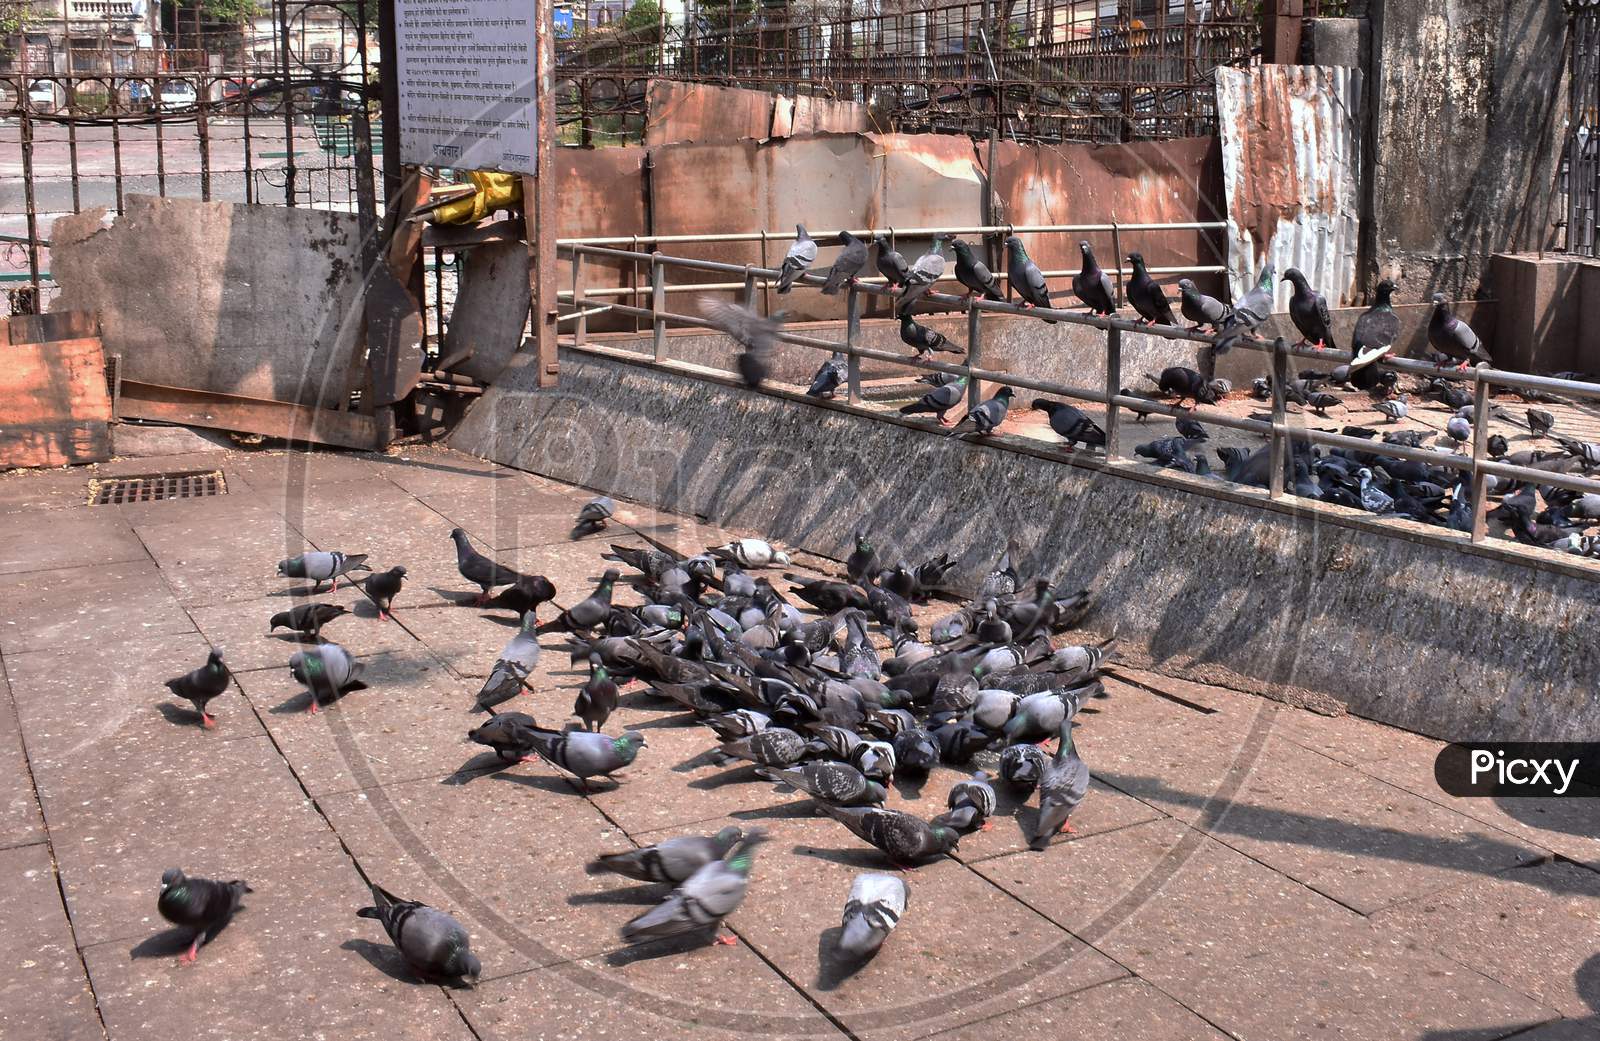 Pigeons Eating Food In A Herd In A Temple.